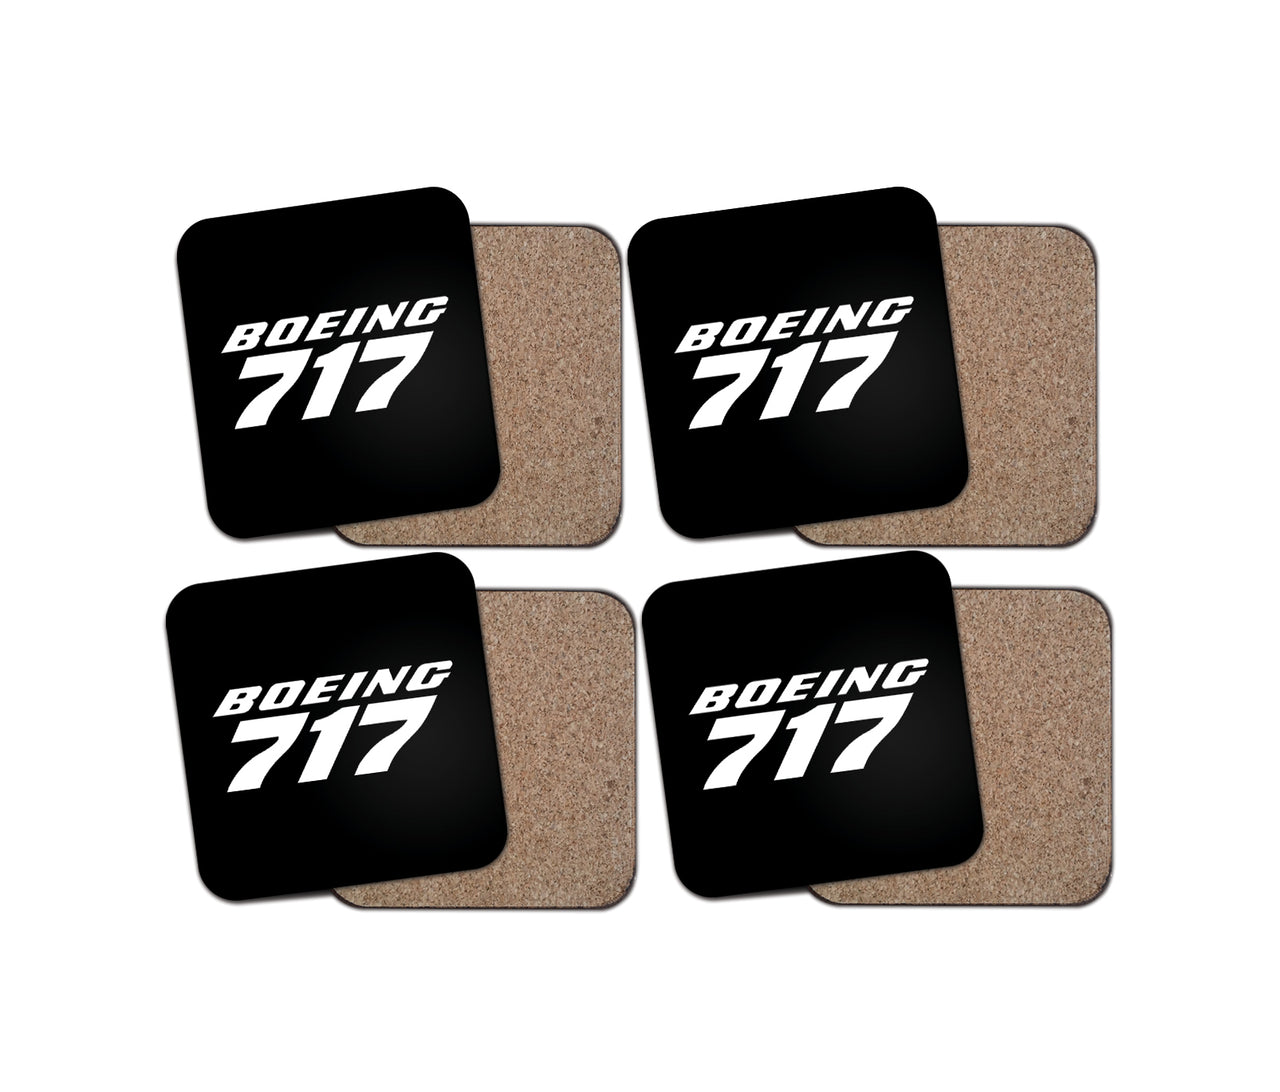 Boeing 717 & Text Designed Coasters